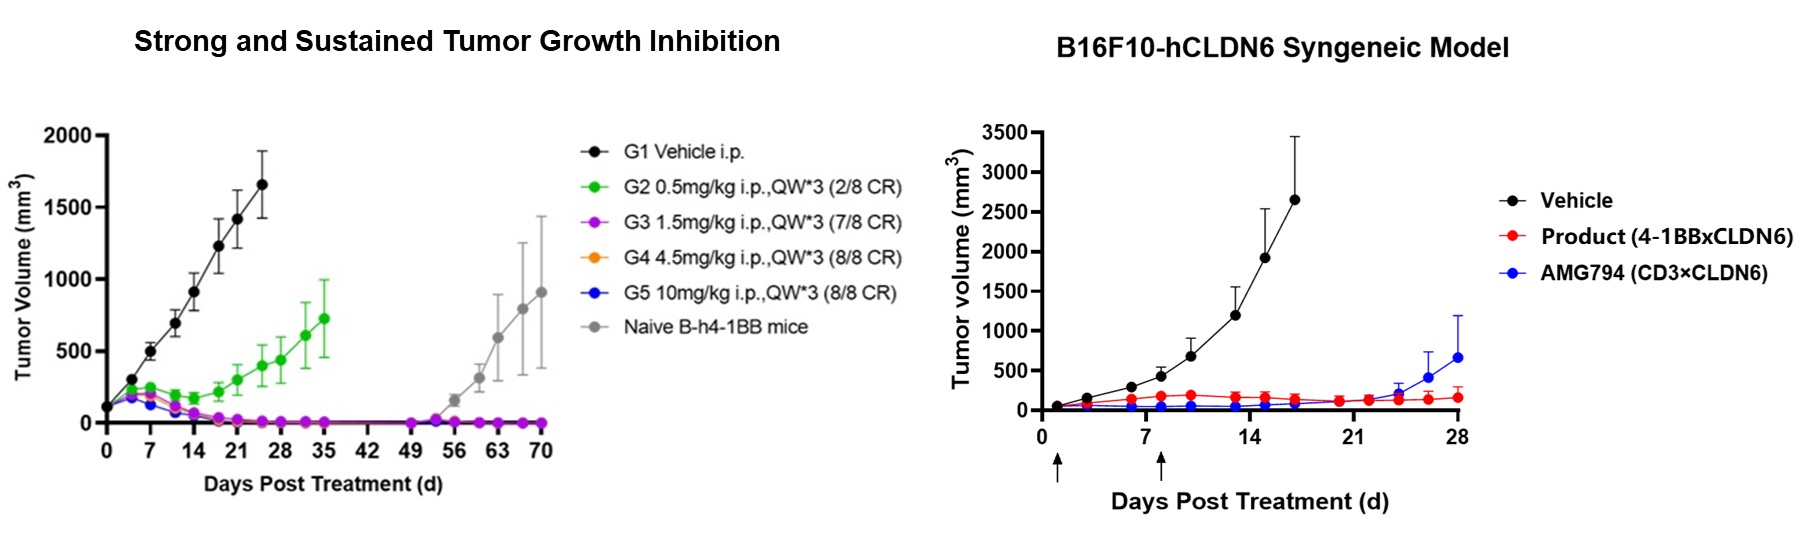 【Product for Licensing】CLDN6 X 4-1BB bispecific antibody